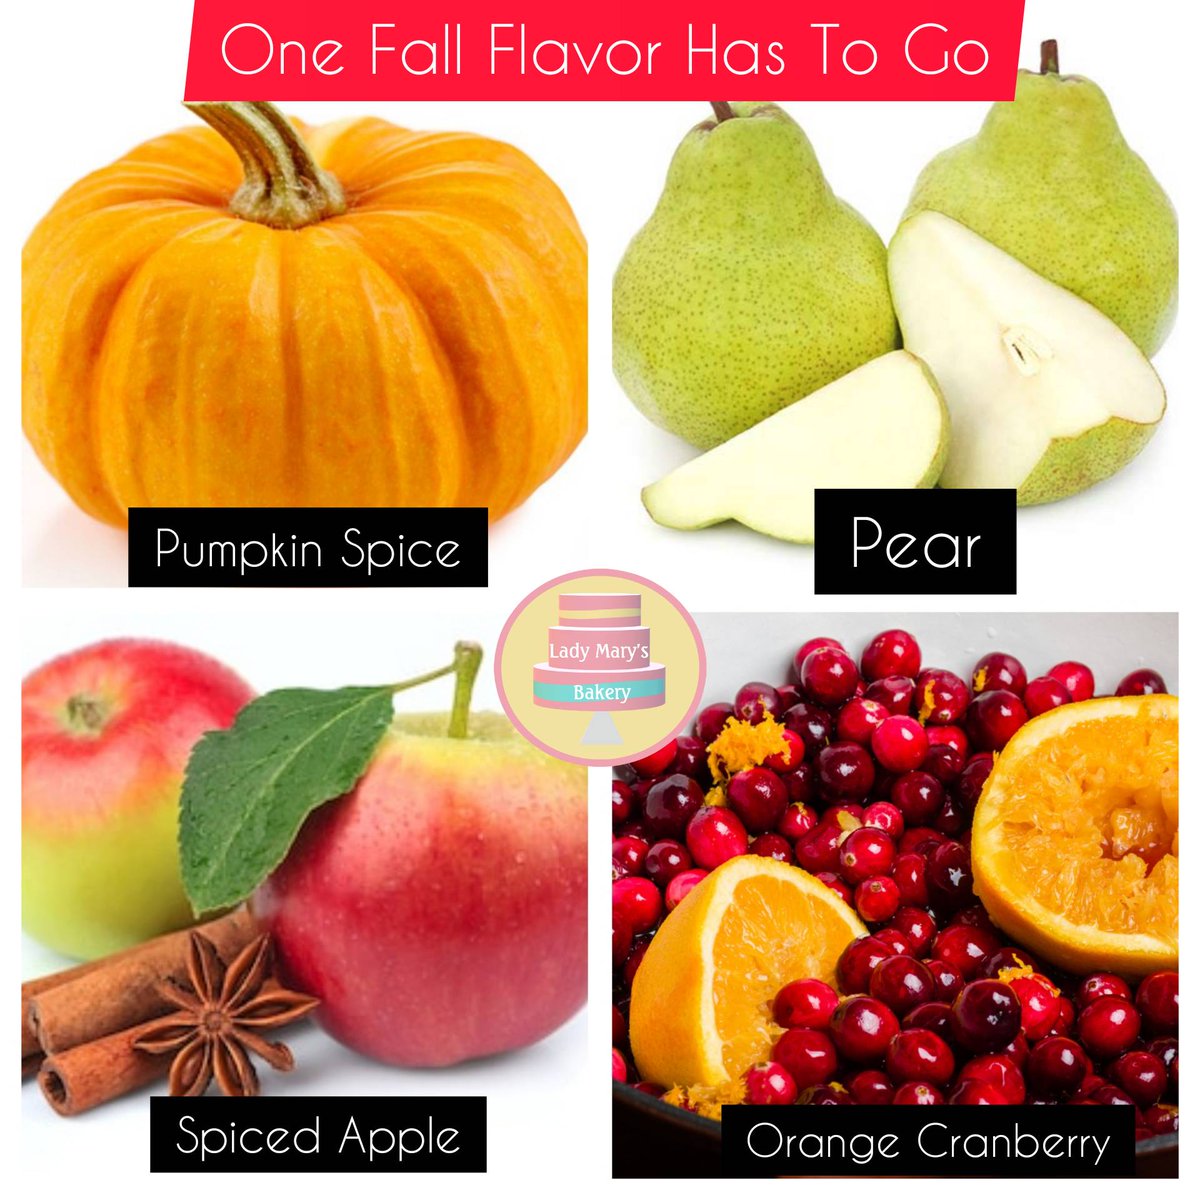 I'm torn! Also, pear is so underrated.

.
.
#onegottago #chooseone #fall #autumn #fallflavors #fallmemes #foodiememes #cakeflavors #muffins  #holidayfood #sweaterweather #applecinnamon #pumpkinspice #pear #orangecranberry #bakery